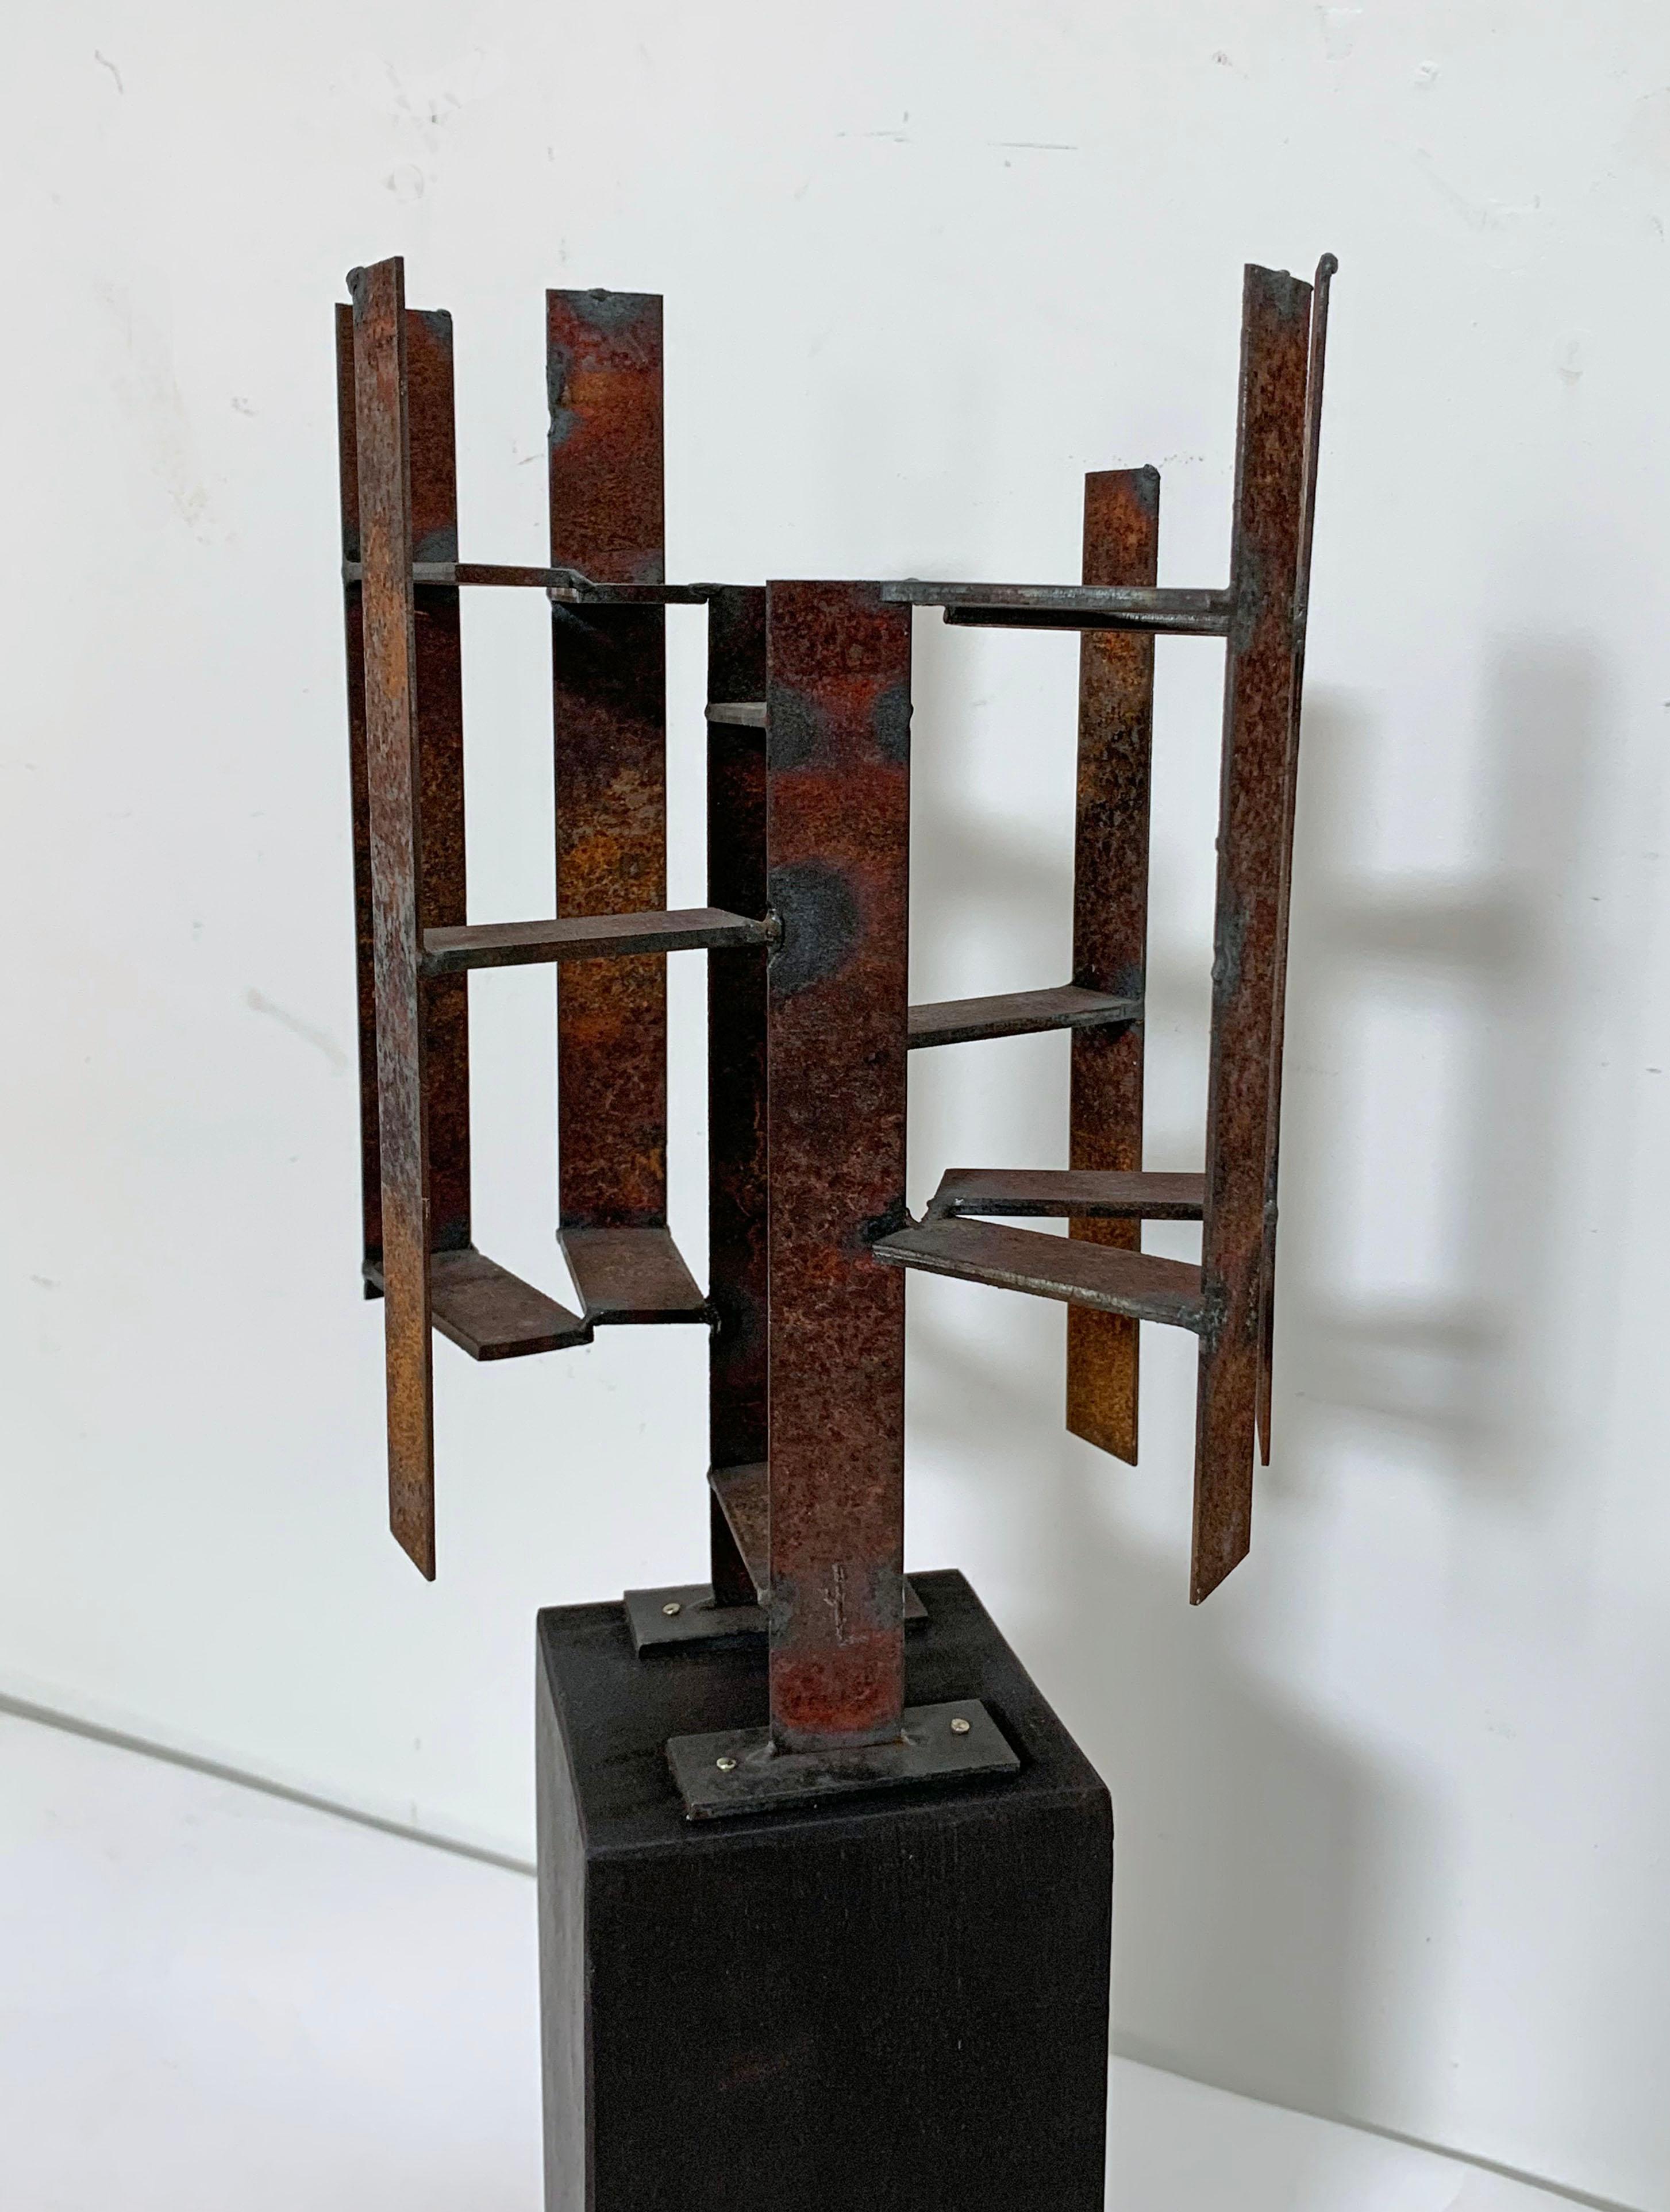 Vintage welded steel sculpture by Acton, MA artist, John Livermore, circa 1970s. Abstract architectural form on mahogany pedestal. Sculpture measures: 7” wide, 6.5” x 10.75” high, without base. The base is 8” high.